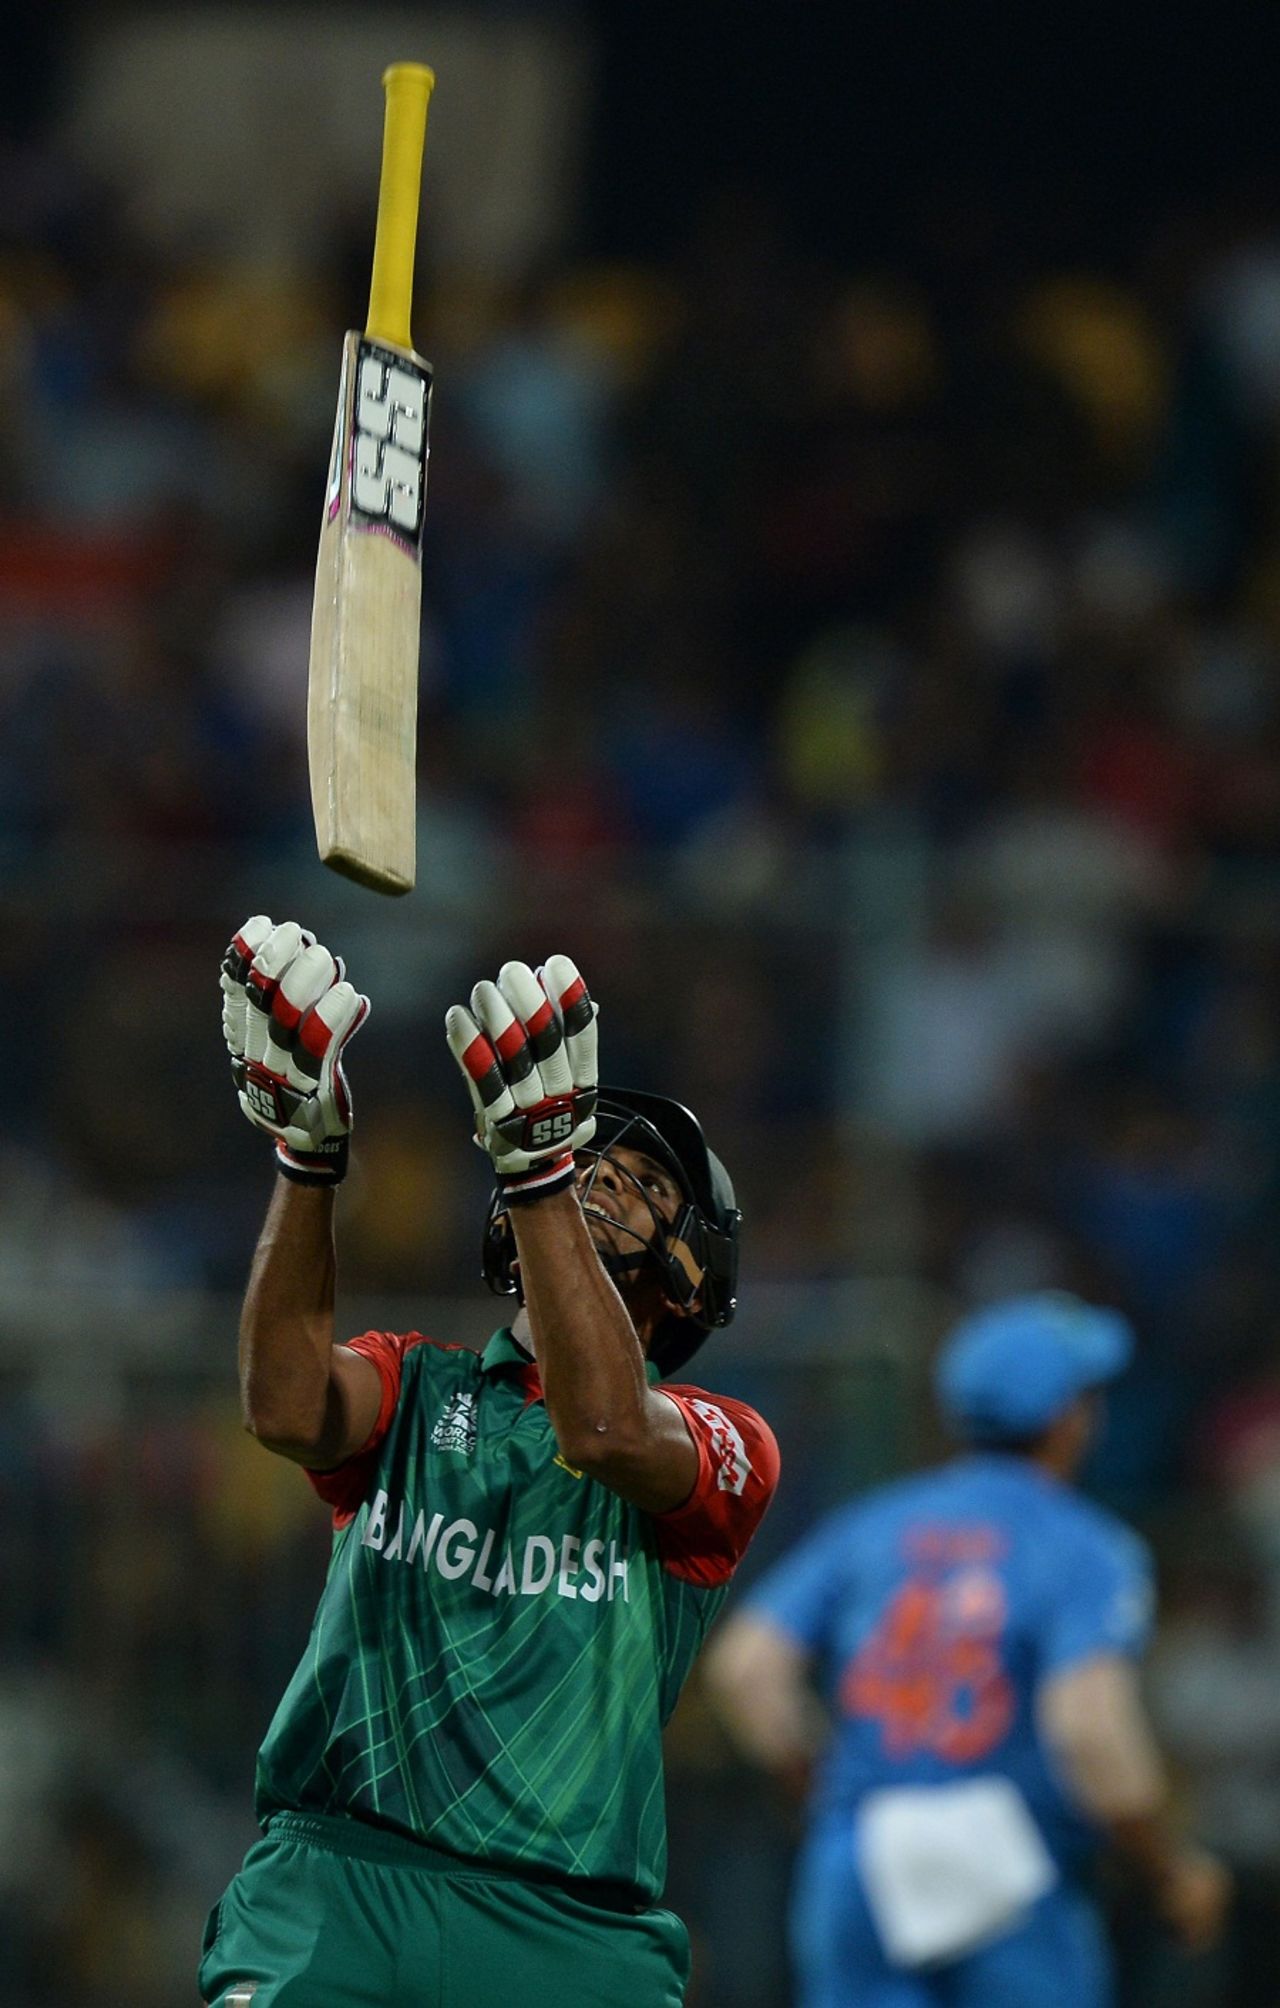 Mahmudullah throws his bat up in frustration after being dismissed, India v Bangladesh, World T20 2016, Group 2, Bangalore, March 23, 2016